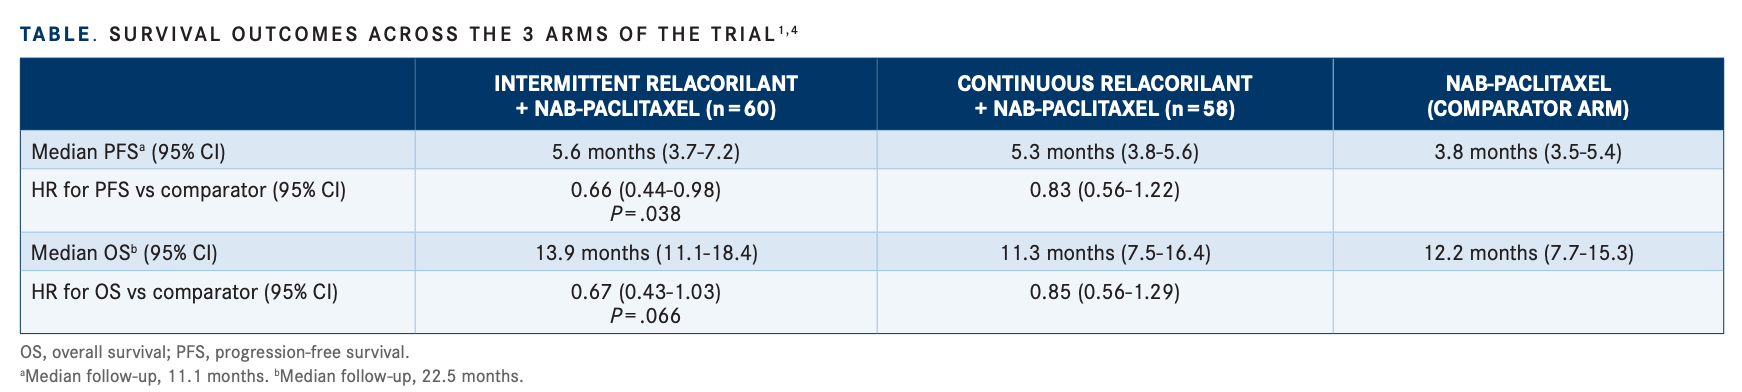 survival outcomes across the 2 arms of the trial